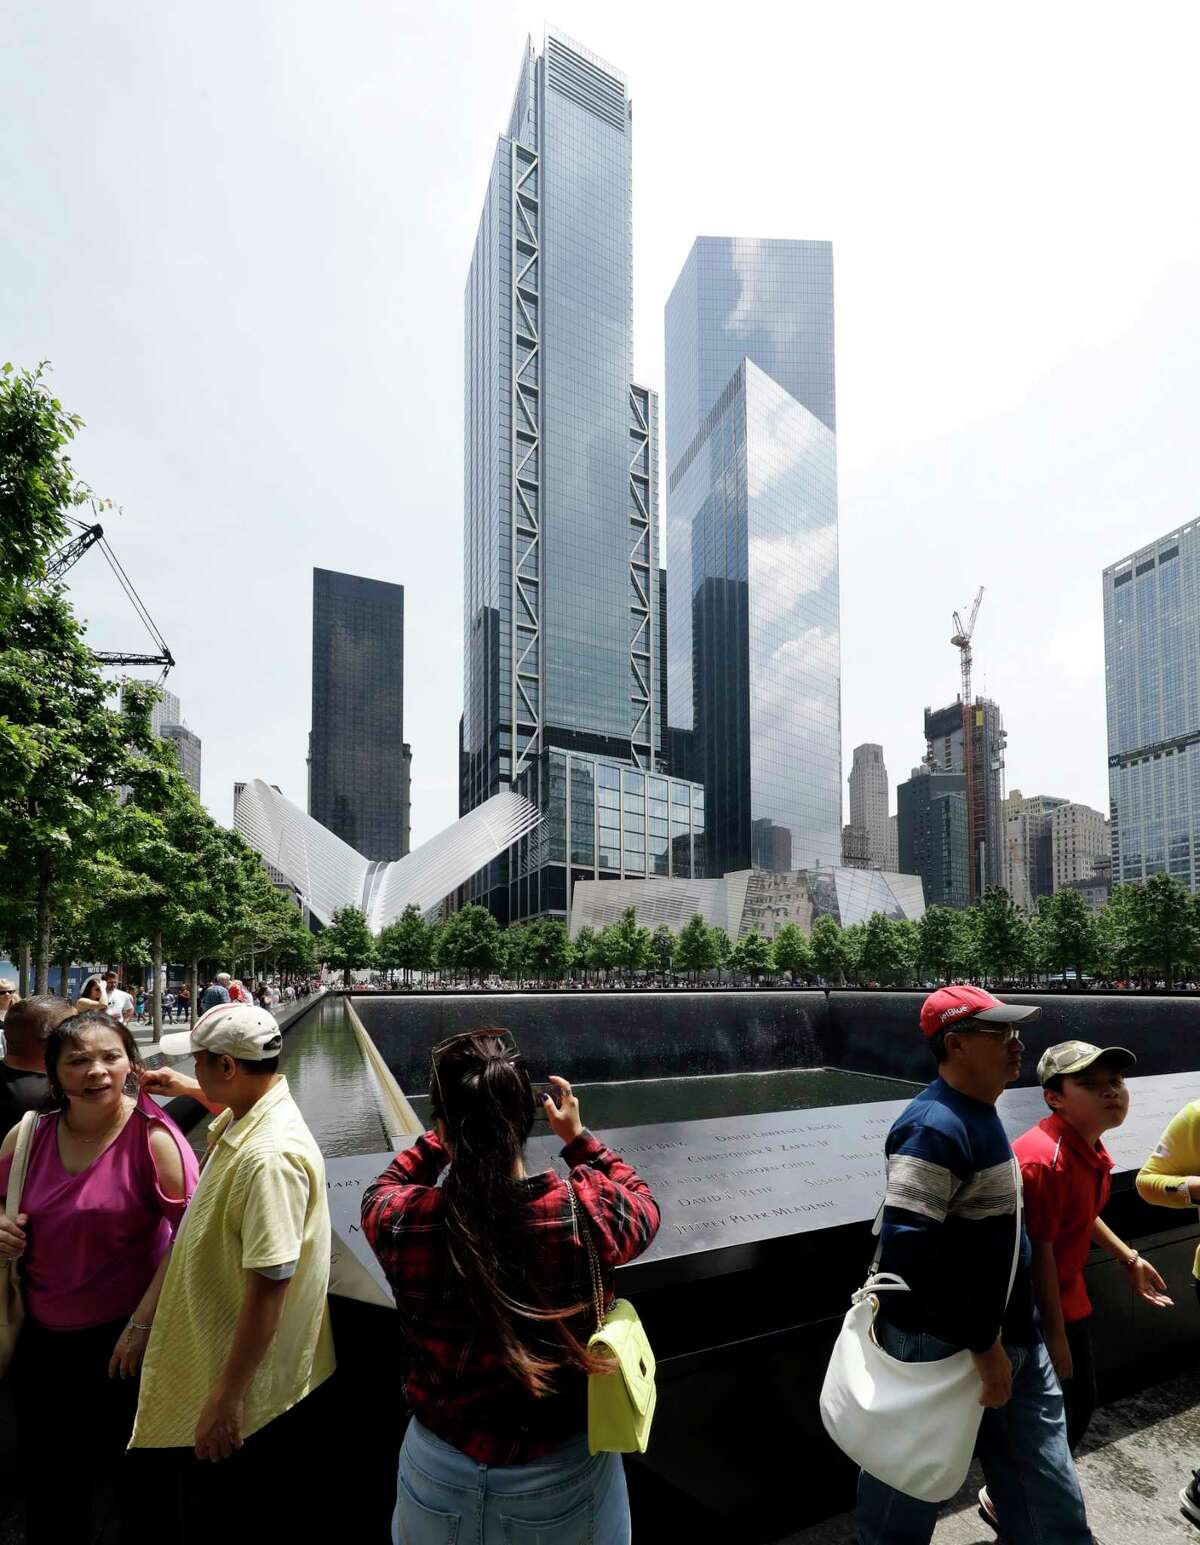 In this June 8, 2018 photo, 3 World Trade Center towers above visitors at the September 11 Memorial in New York. The center's latest skyscraper opens Monday. (AP Photo/Mark Lennihan)